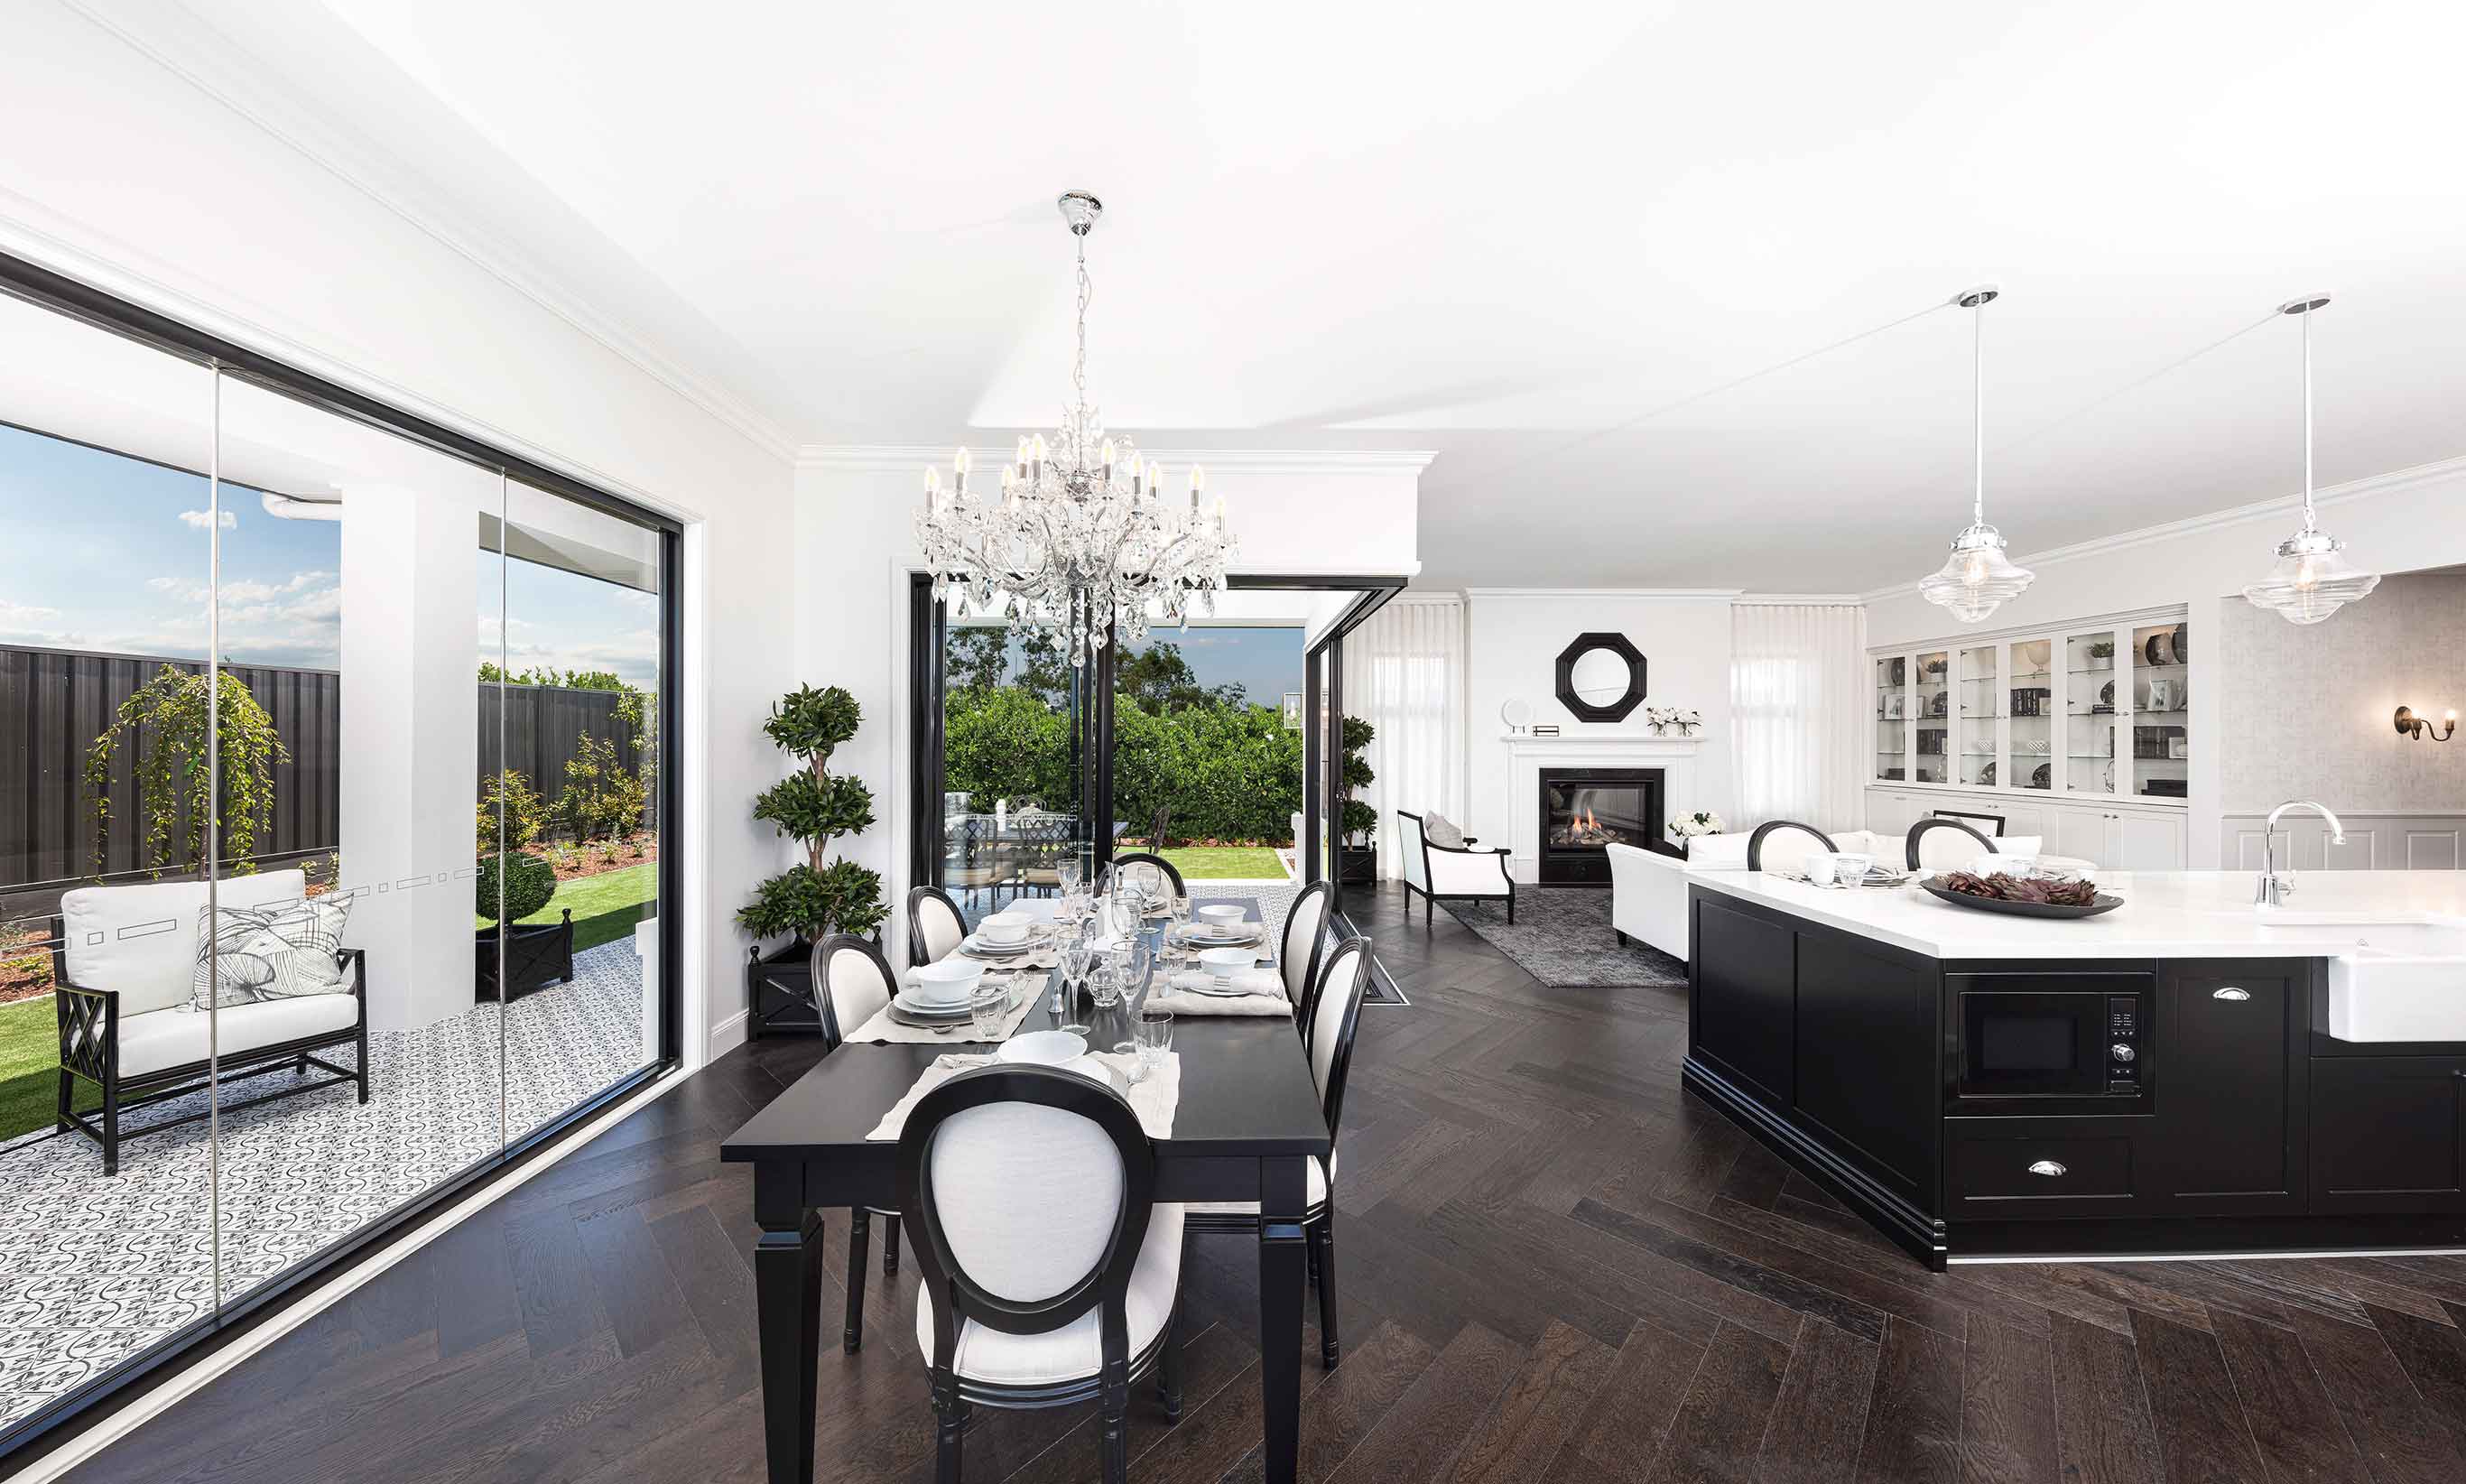 Luxe Parisian styling is centred on a combination of effortless elegance and highly functional spaces and furniture, often featuring a monochrome palette such as this striking home, The Cranbourne on display at Googong.